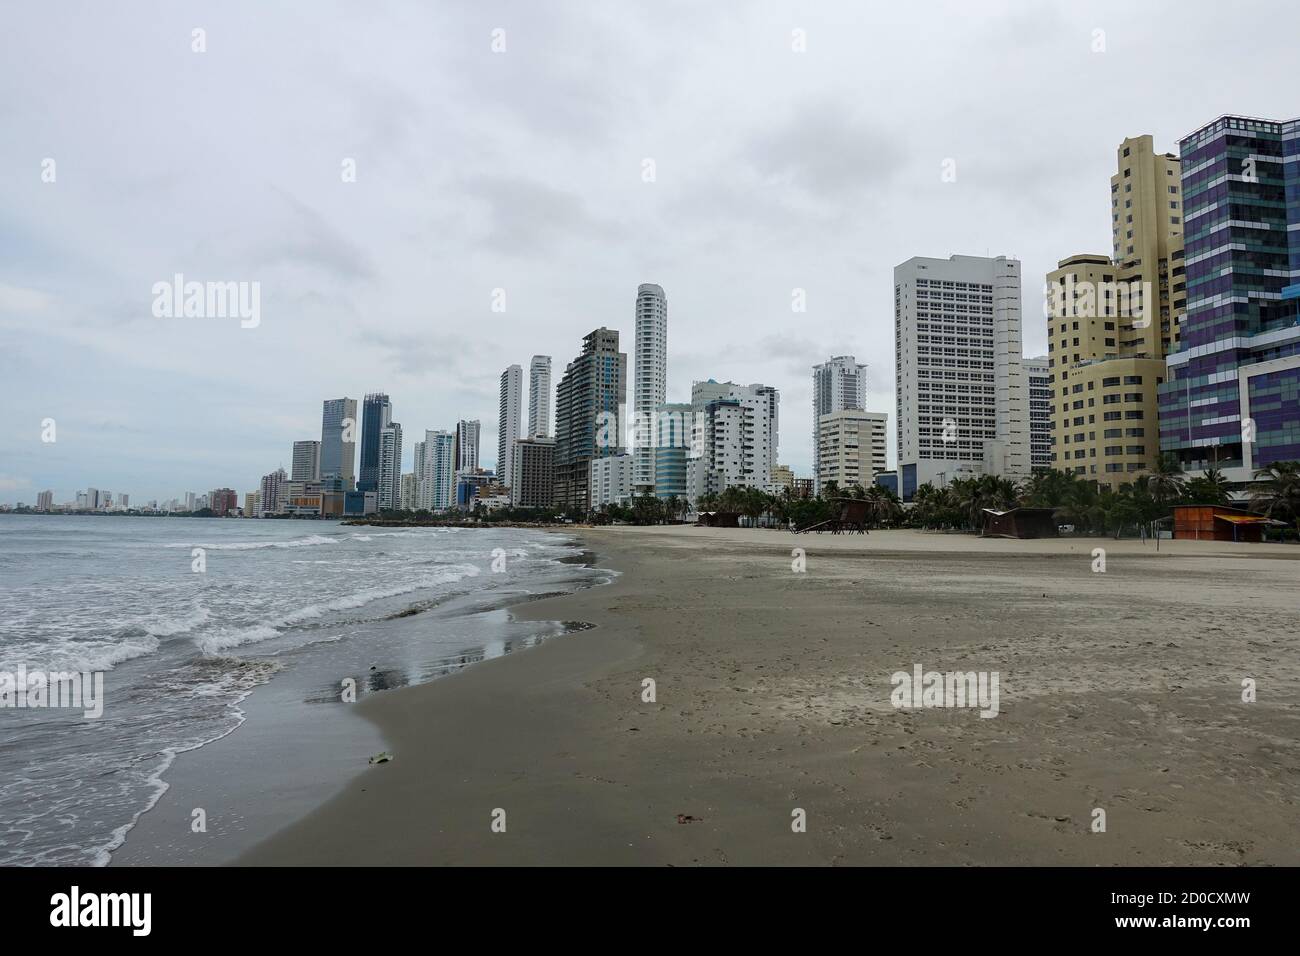 Beach closed or shutdown concept amid covid 19 fears and panic over contagious virus spread in Bocagrande, Cartagena, Colombia Stock Photo